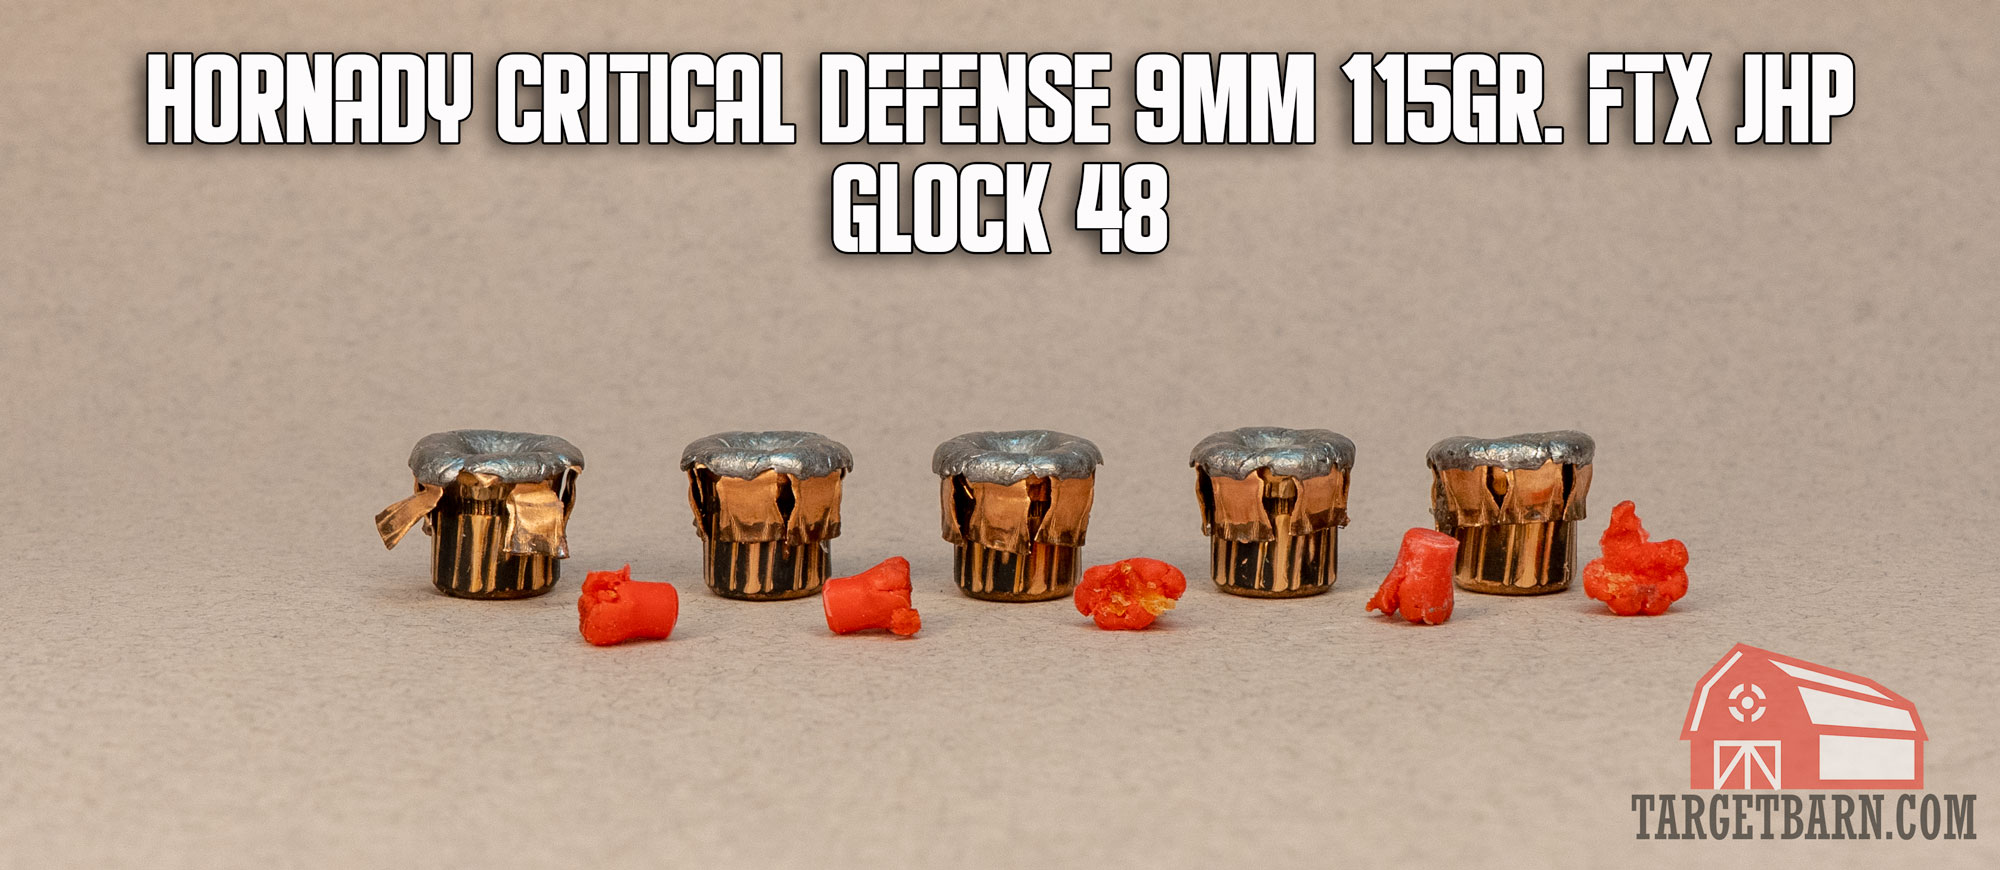 showing expanded rounds of hornady critical defense 9mm from a glock 48